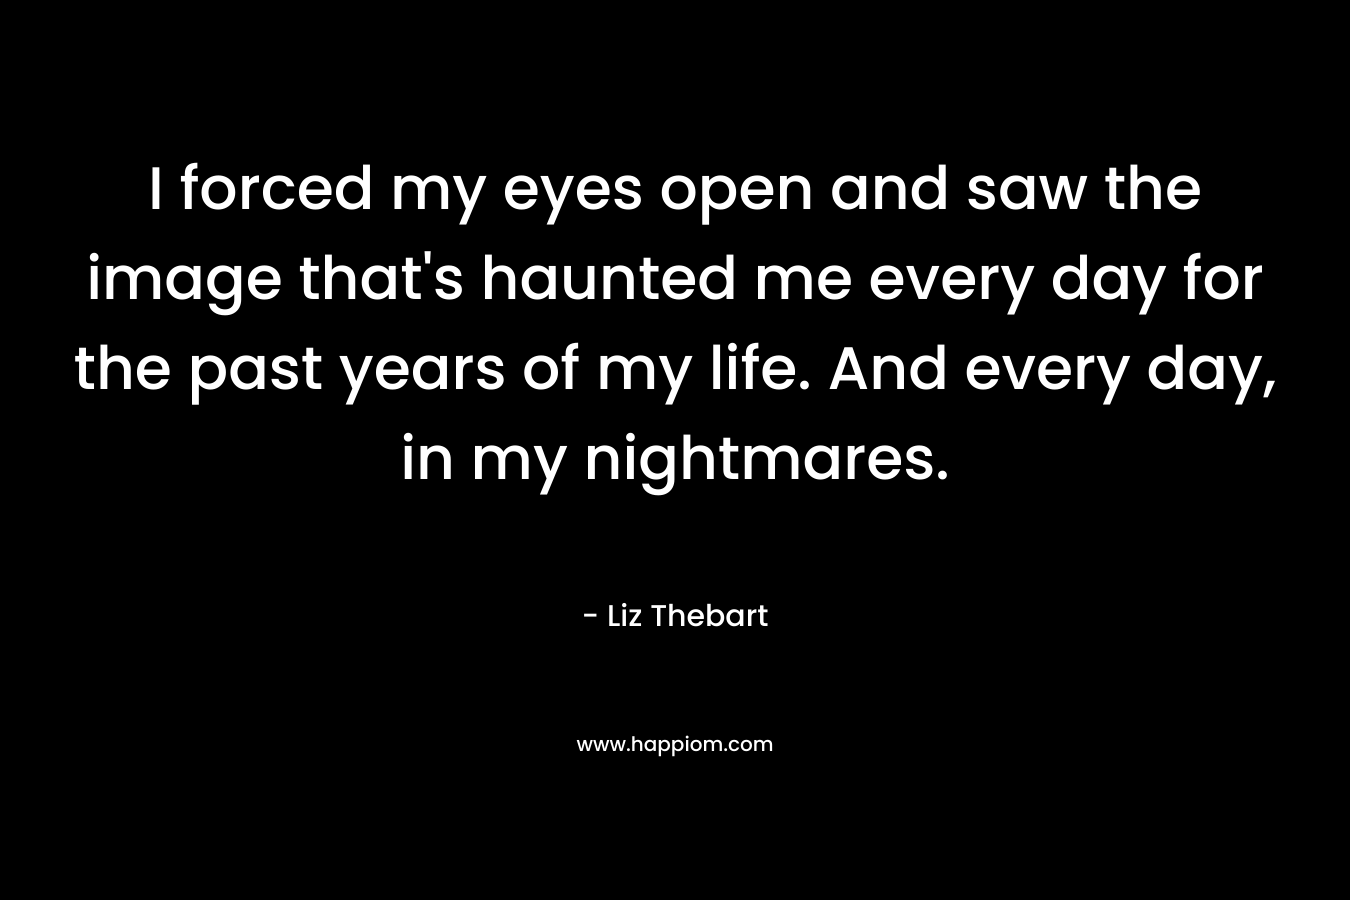 I forced my eyes open and saw the image that’s haunted me every day for the past years of my life. And every day, in my nightmares. – Liz Thebart